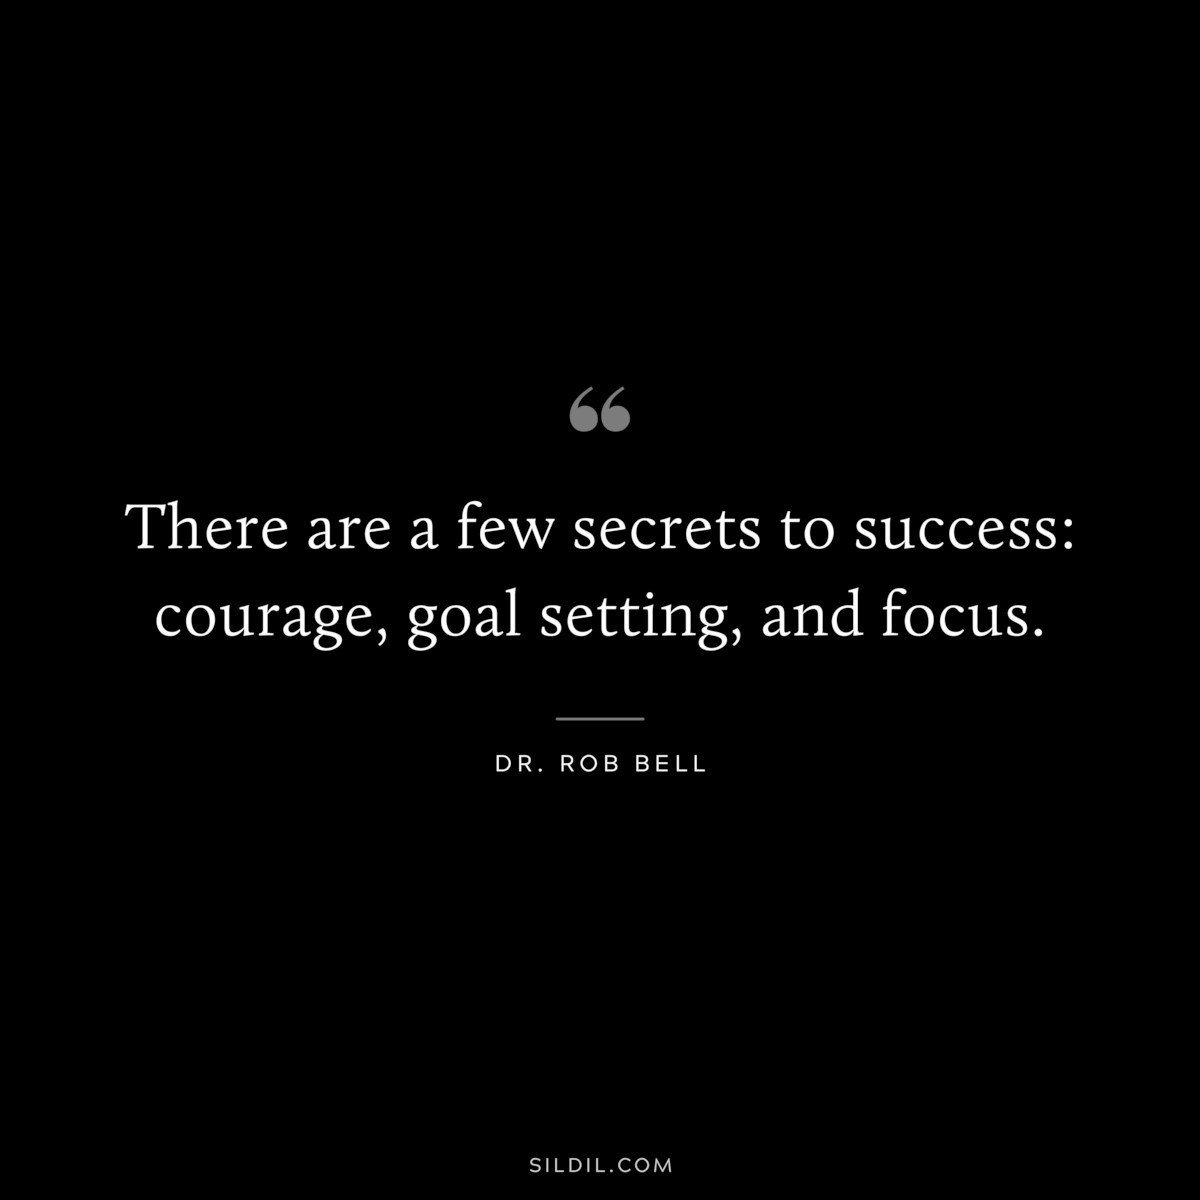 There are a few secrets to success: courage, goal setting, and focus. ― Dr. Rob Bell